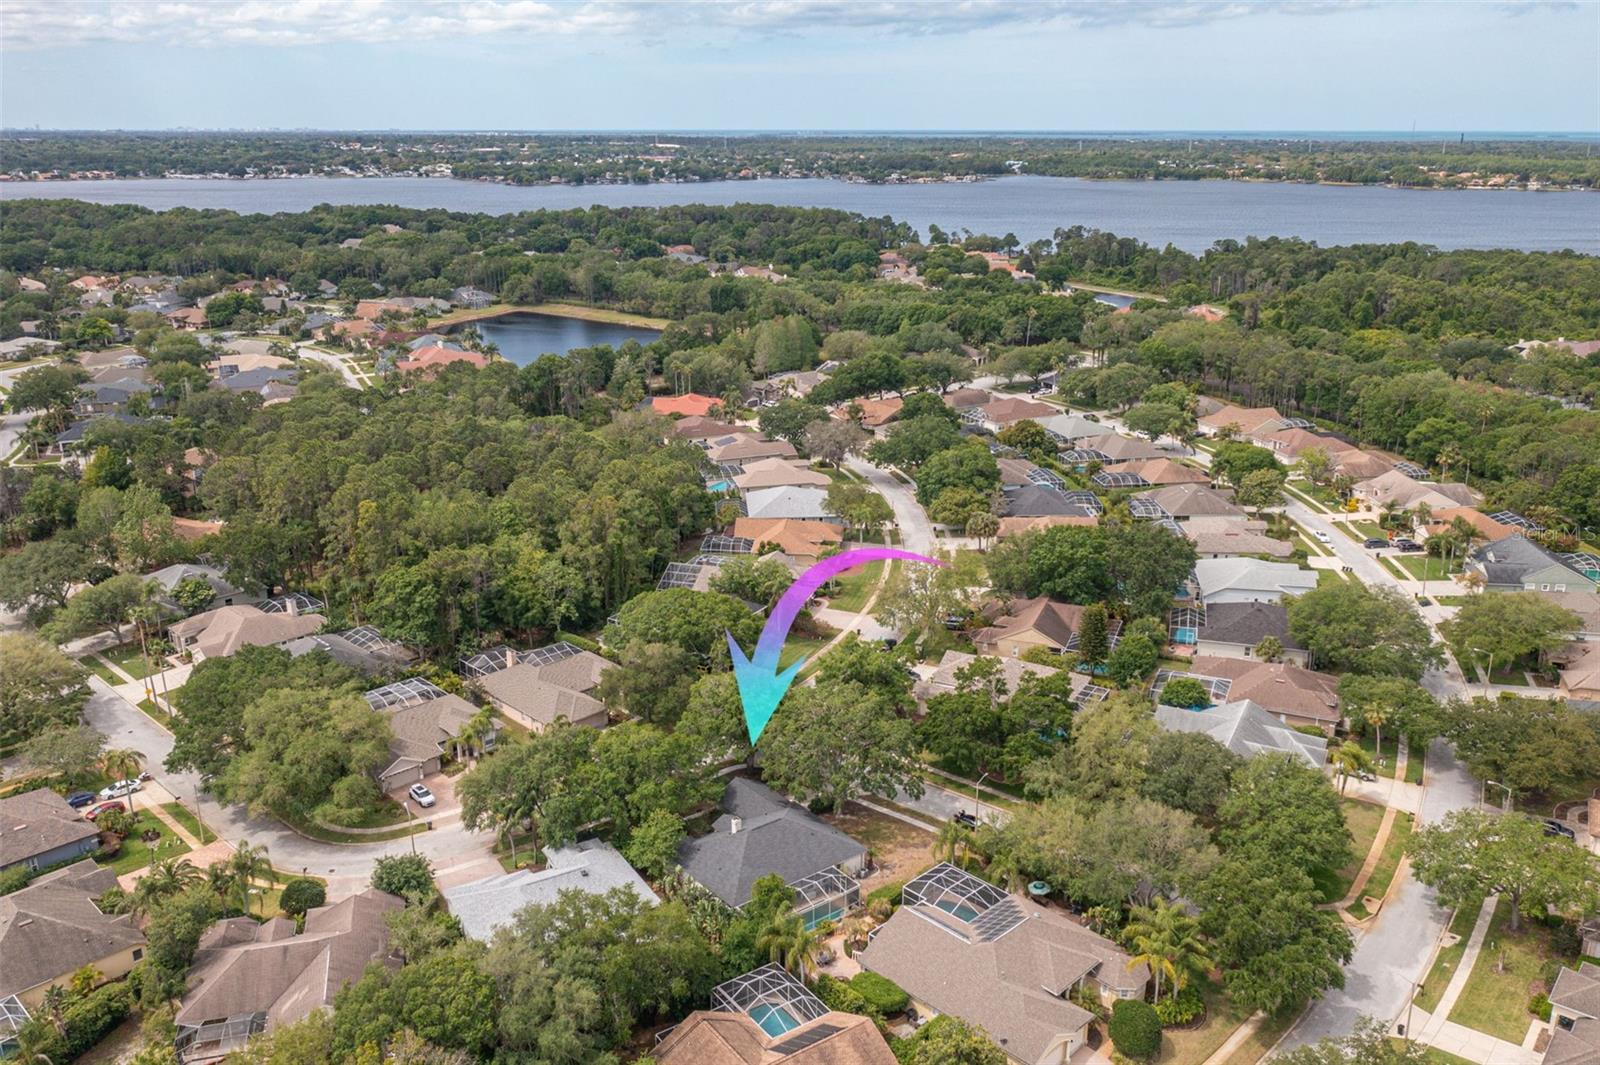 Private access to Lakefront Park and Lake Tarpon!